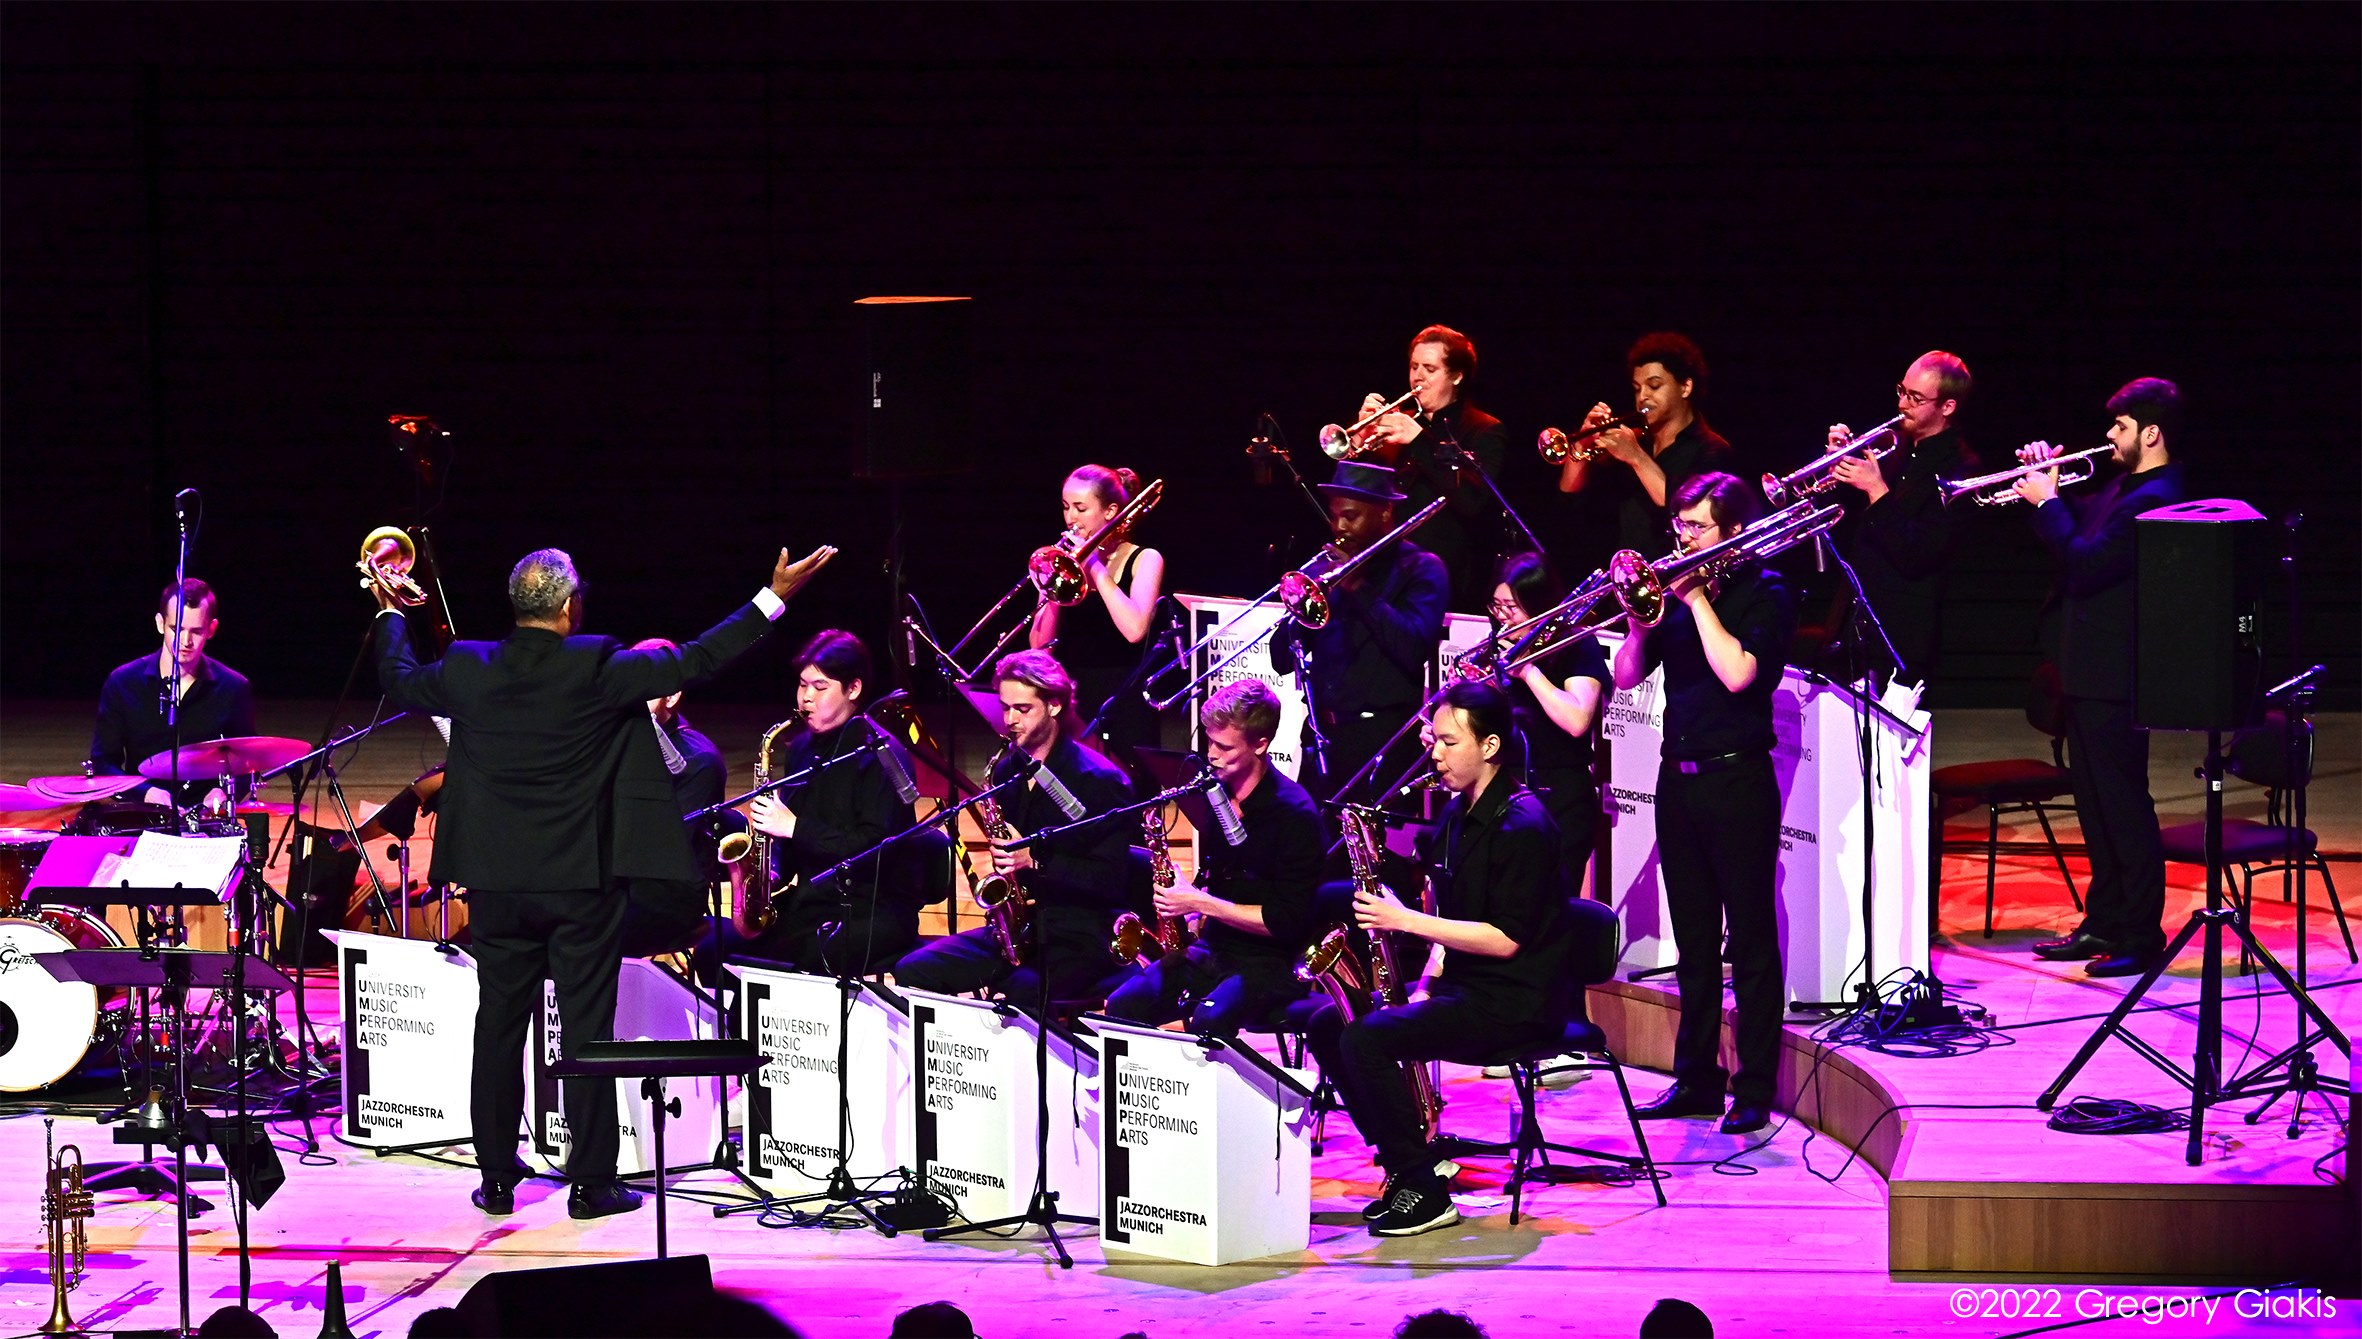 Jazz musicians from the Munich University of Music and Performing Arts can be seen making music on the purple-illuminated stage of the Isarphilharmonie.